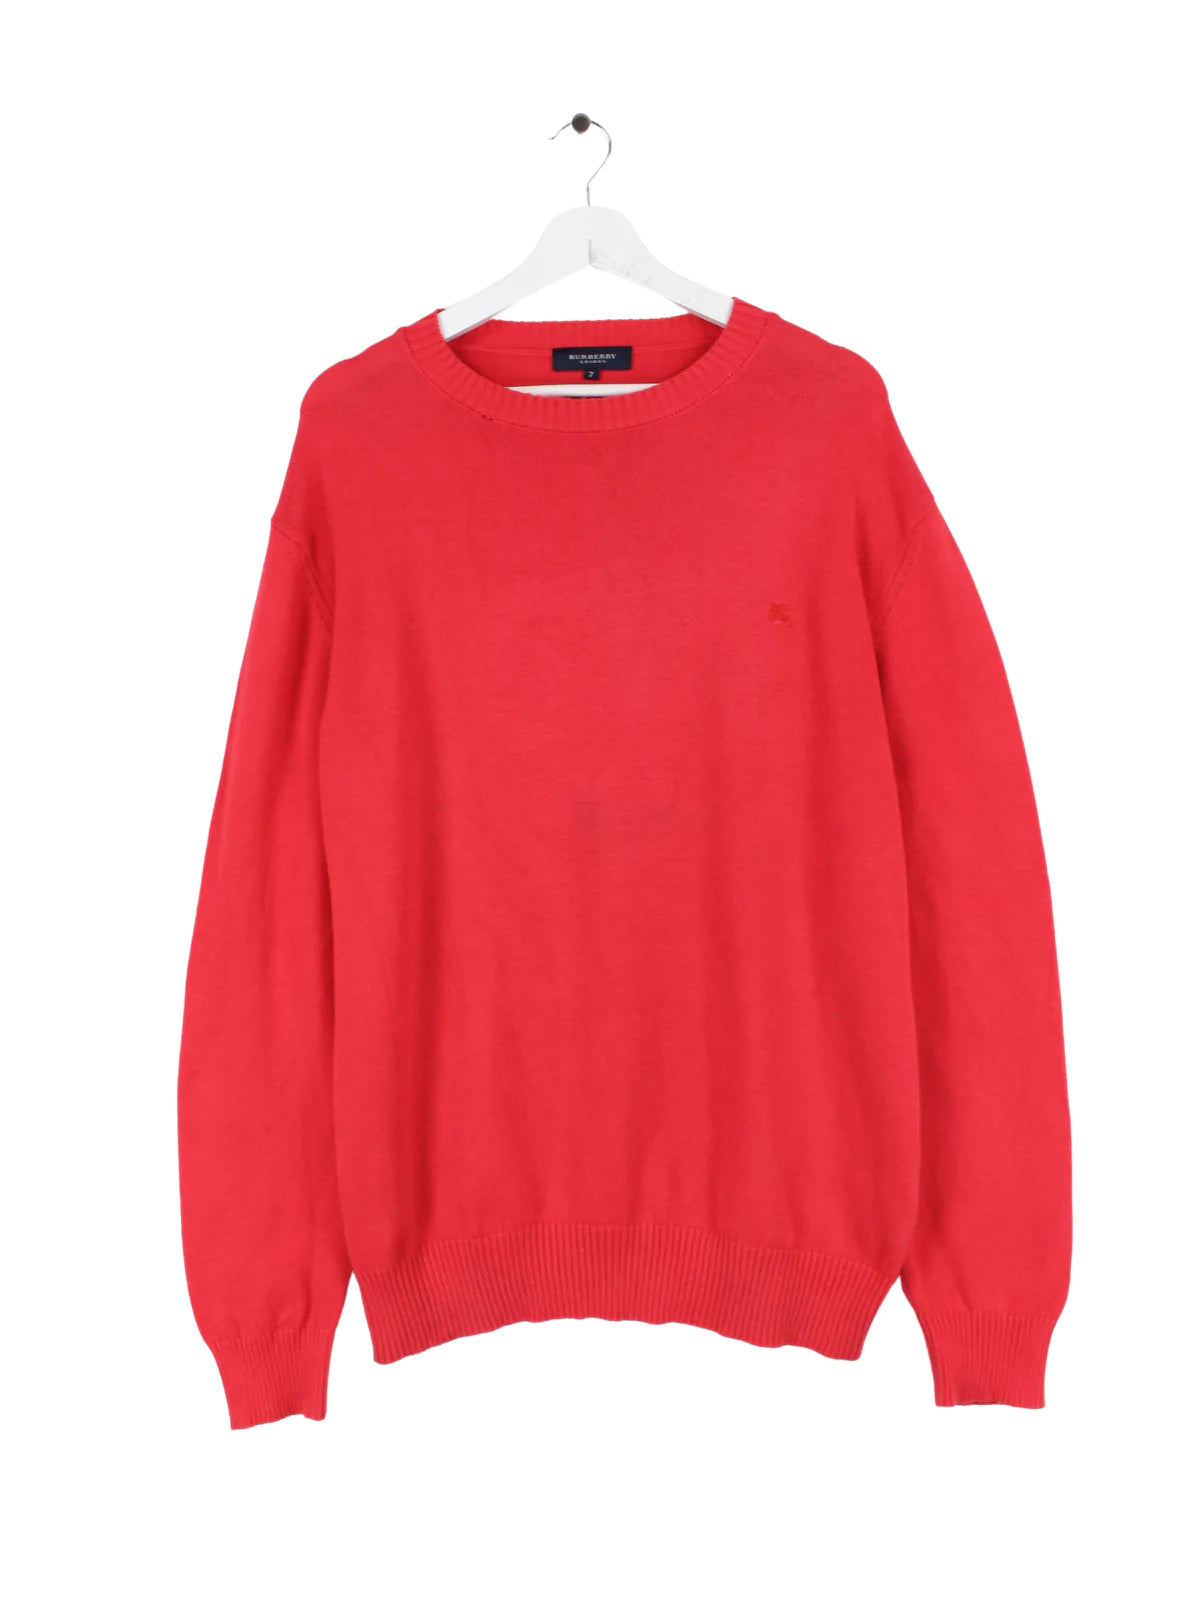 Burberry Strick Pullover Rot XXL